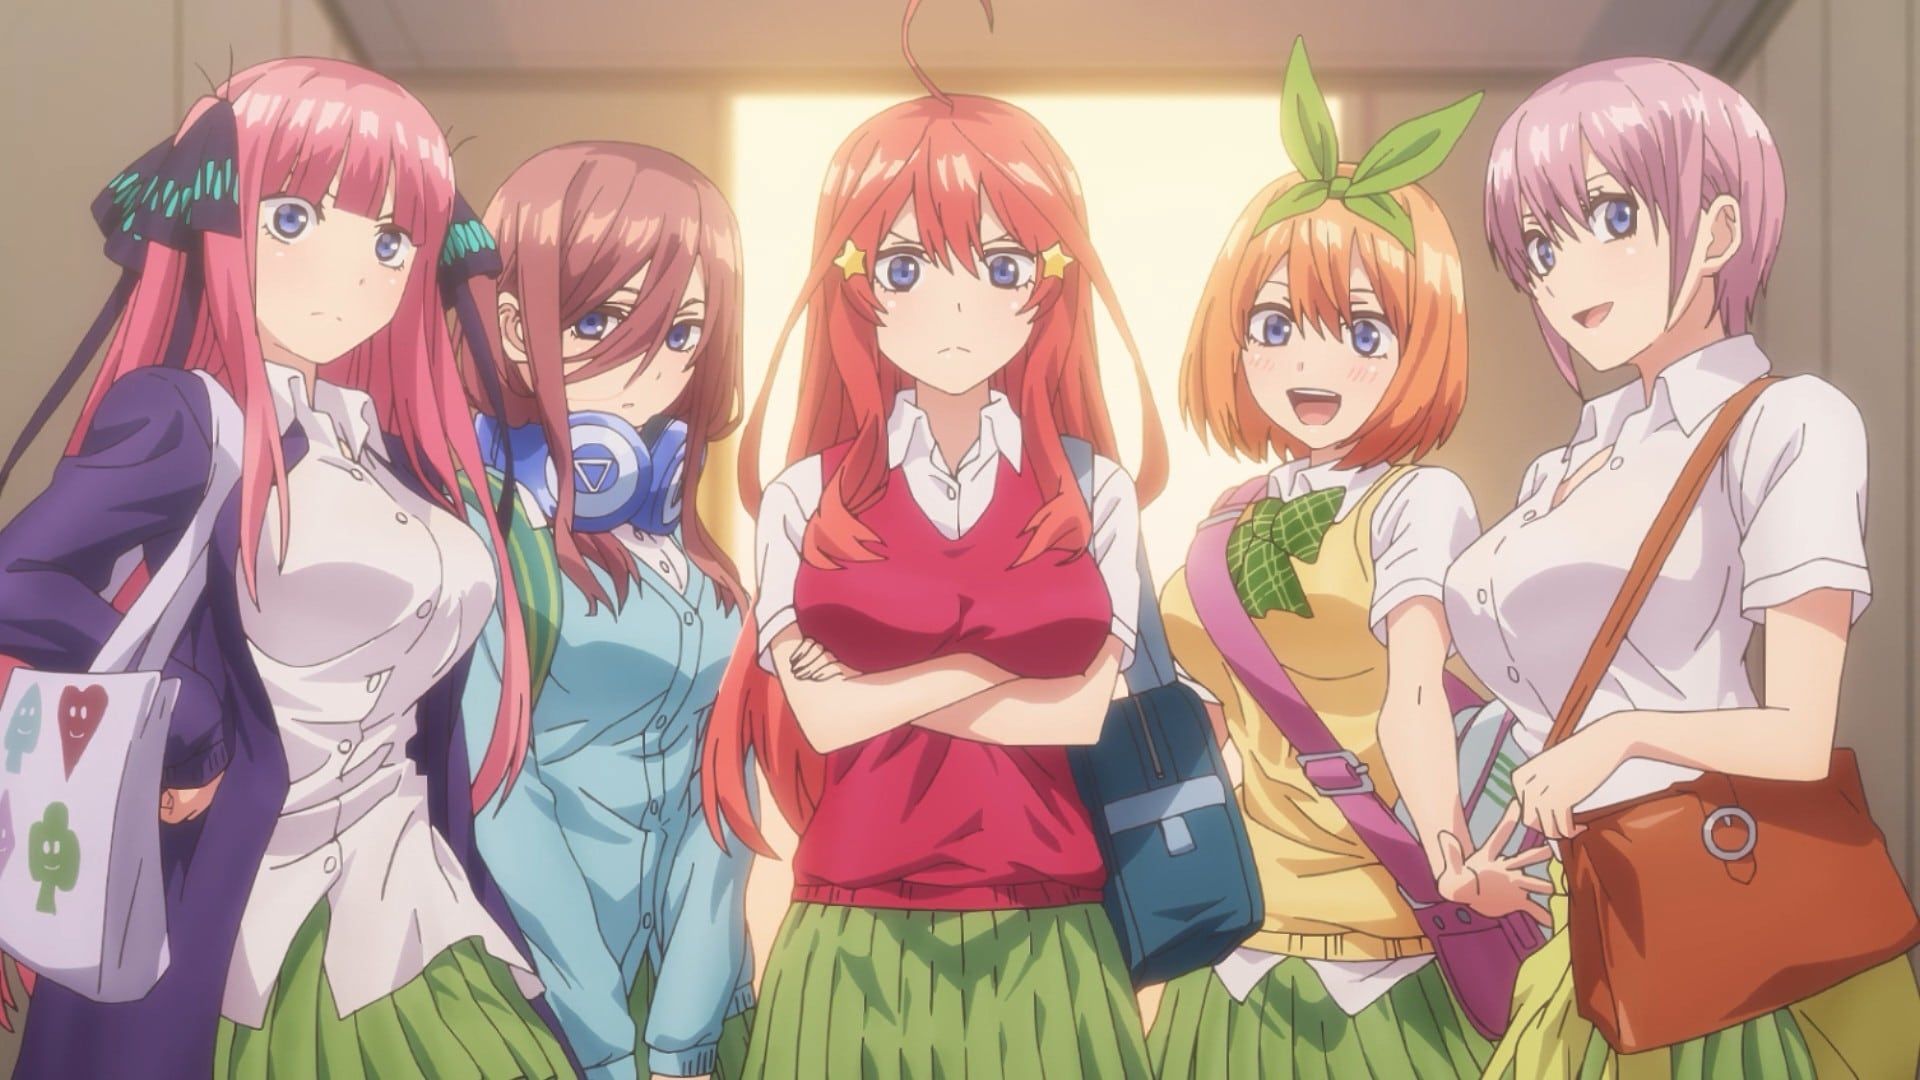 Watch The Quintessential Quintuplets Episode 1 Online - The